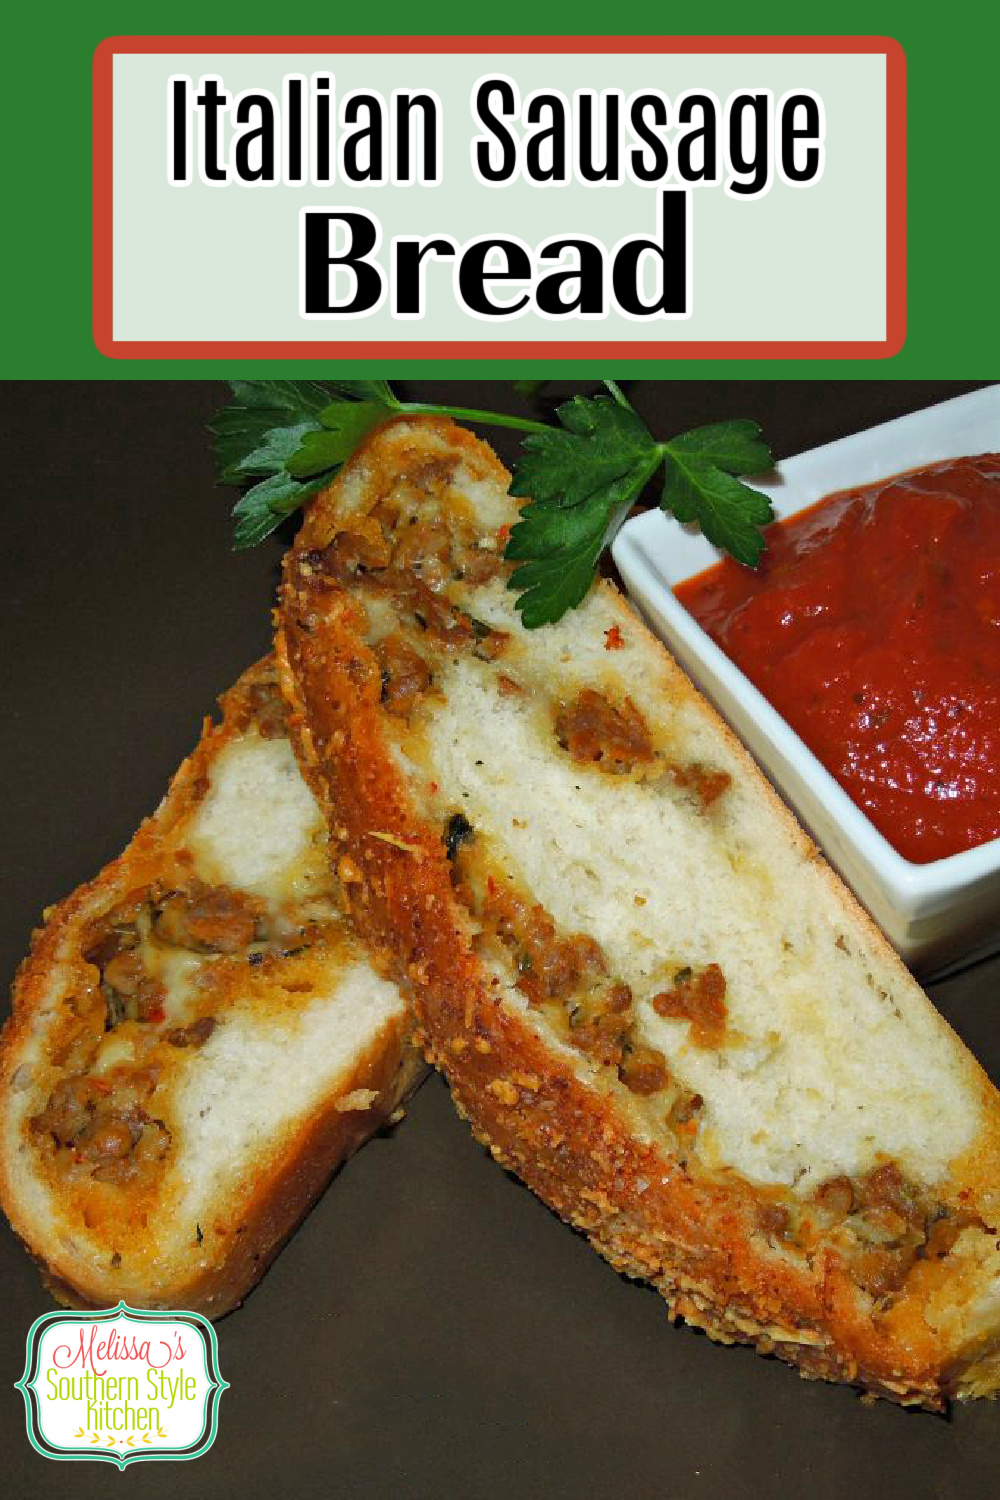 This made-from-scratch bread is filled with Italian sausage and a 3 cheese blend that takes it over the top #italianbread #Italiansausagebread #Italiansausage #bread #breadrecipes #cheesebread #3cheesebread #southernrecipes #southernfood